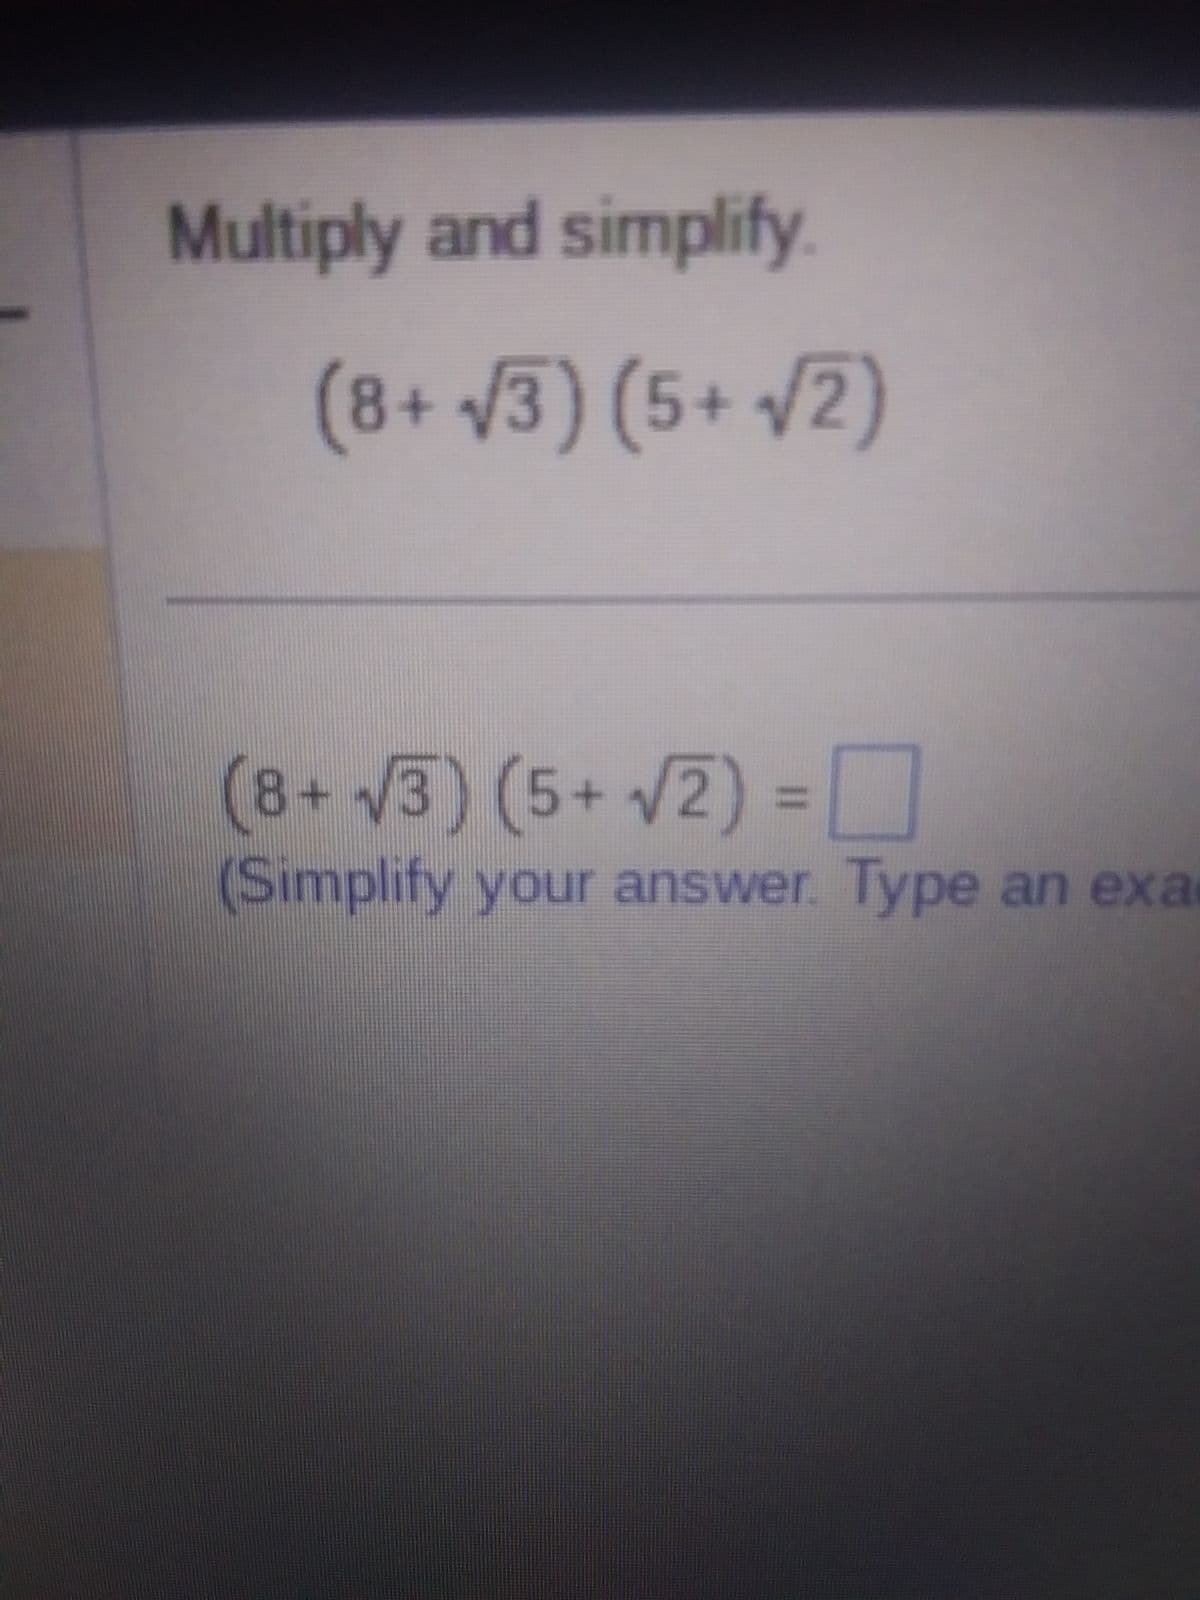 Multiply and simplify
(8+√3)(5+ √2)
(8+√3) (5+ √2) = 0
(Simplify your answer. Type an exa